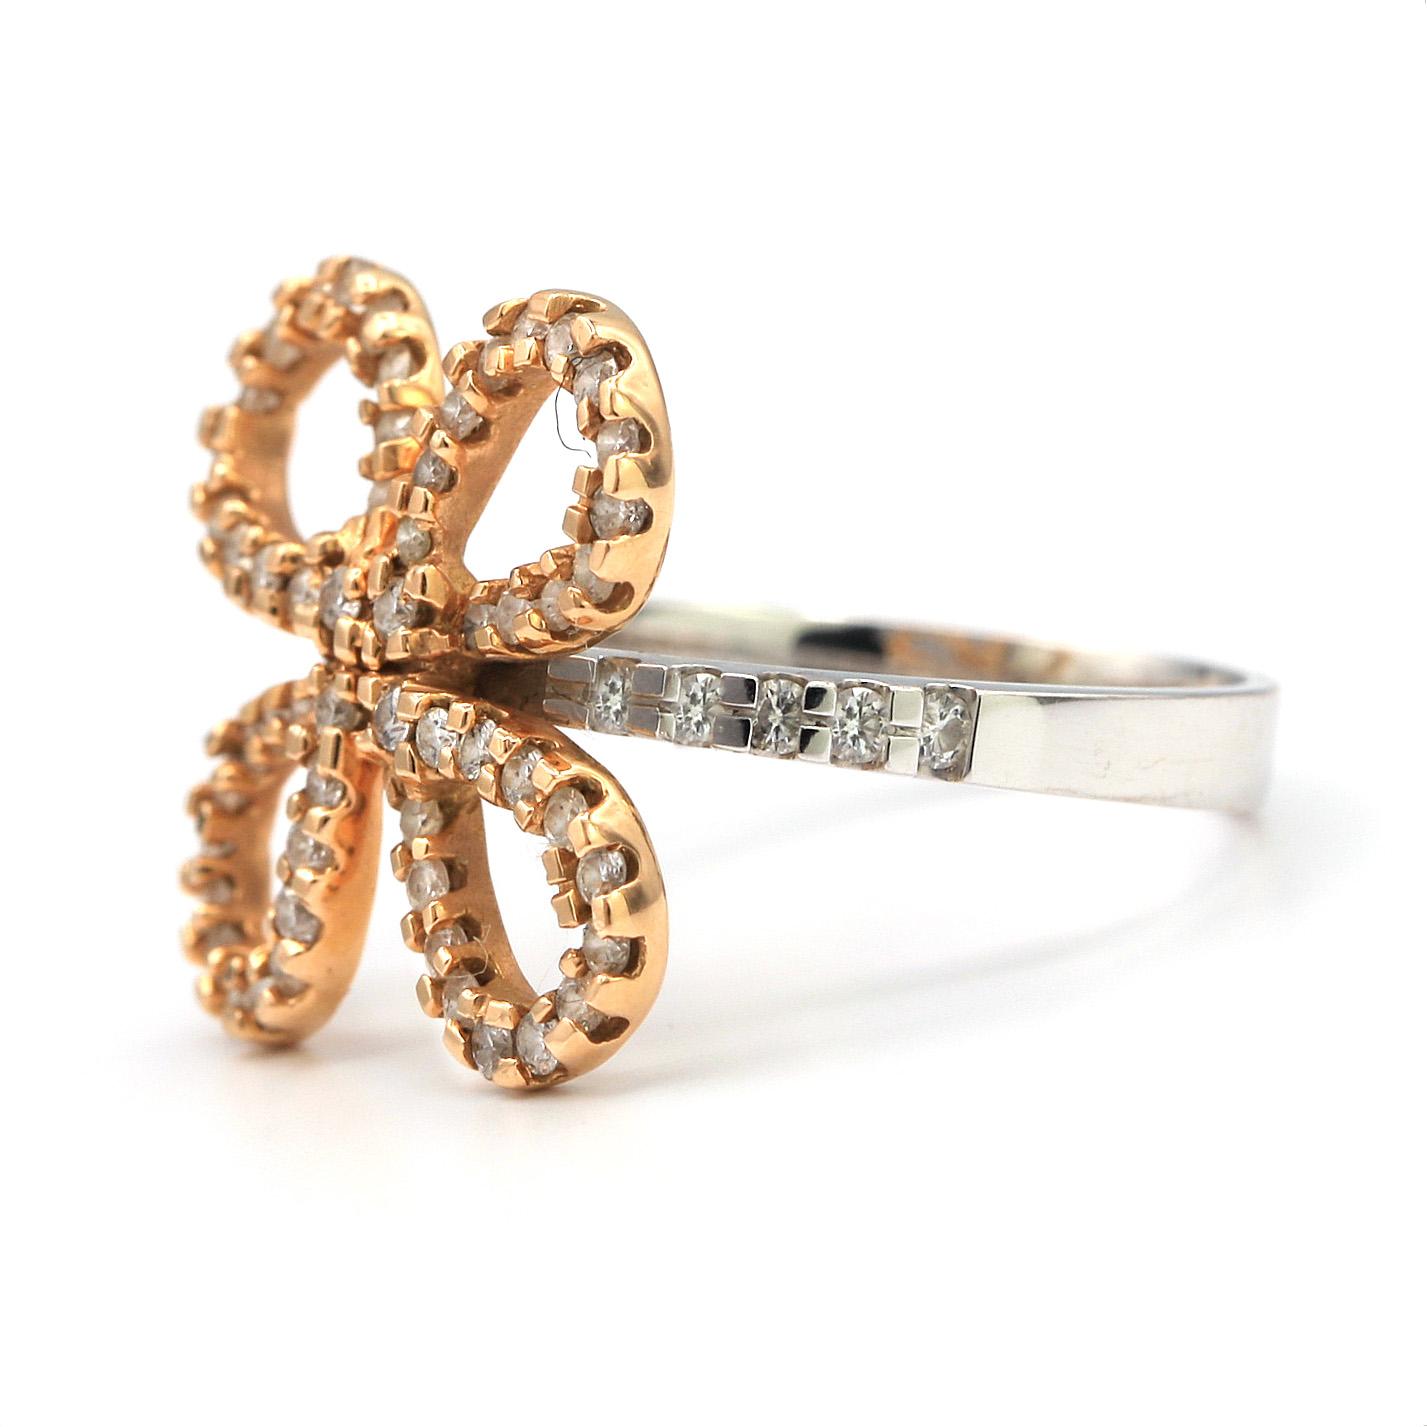 This Flower shaped ring lined with white pave diamonds weighting .41 carats. Mounted in 18k White and Rose Gold.

Stamped 